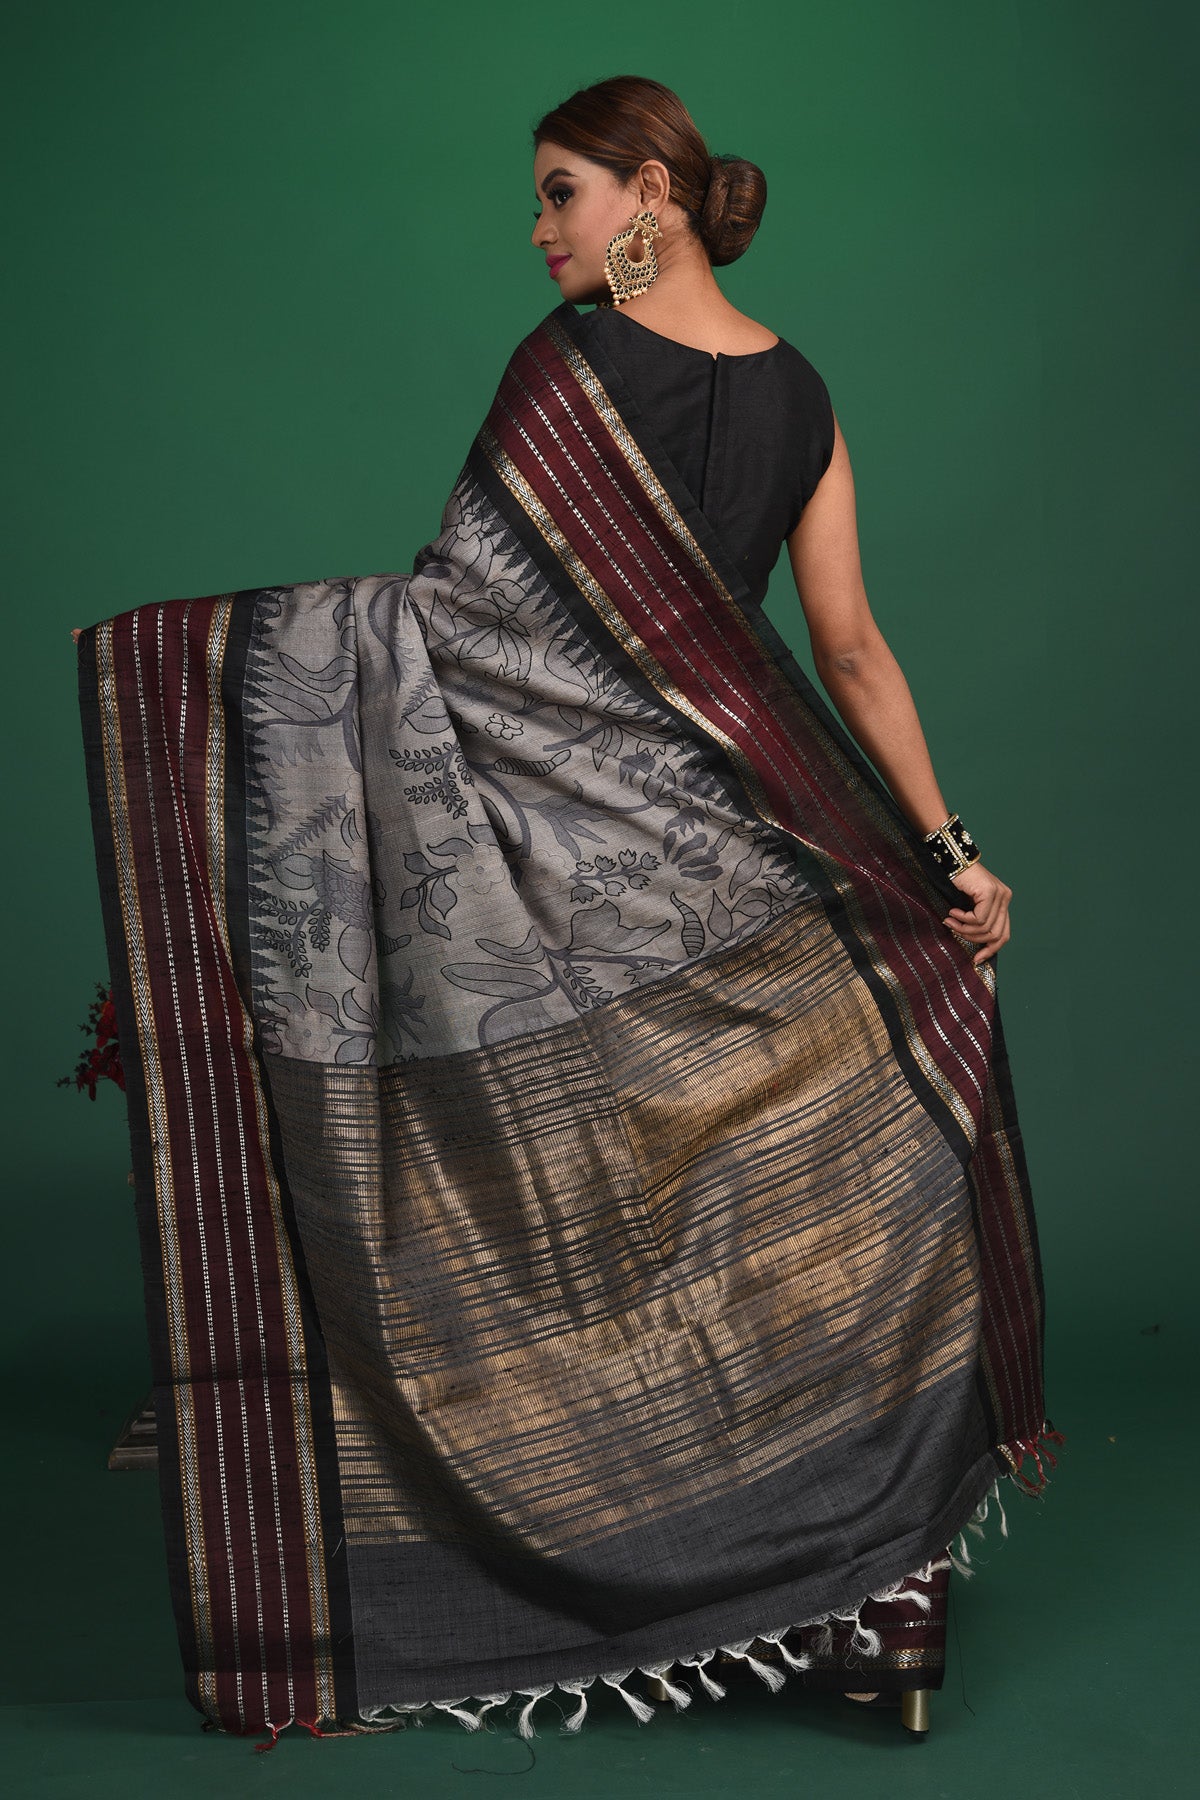 Buy this exquisite dark grey tussar saree with multicolor vidharbha and zari border online in USA which is handcrafted from fine silk tussar fabric, this tie and dye saree brings out the nature of flow. This tussar saree with elegant Vidharbha border is making everyone swoon over it. Make it yours and flaunt a handwoven marvel with minimal jewellery for a casual day outfit. Add this pure tussar saree to your collection from Pure Elegance Indian fashion store in USA.-Back view with open pallu.